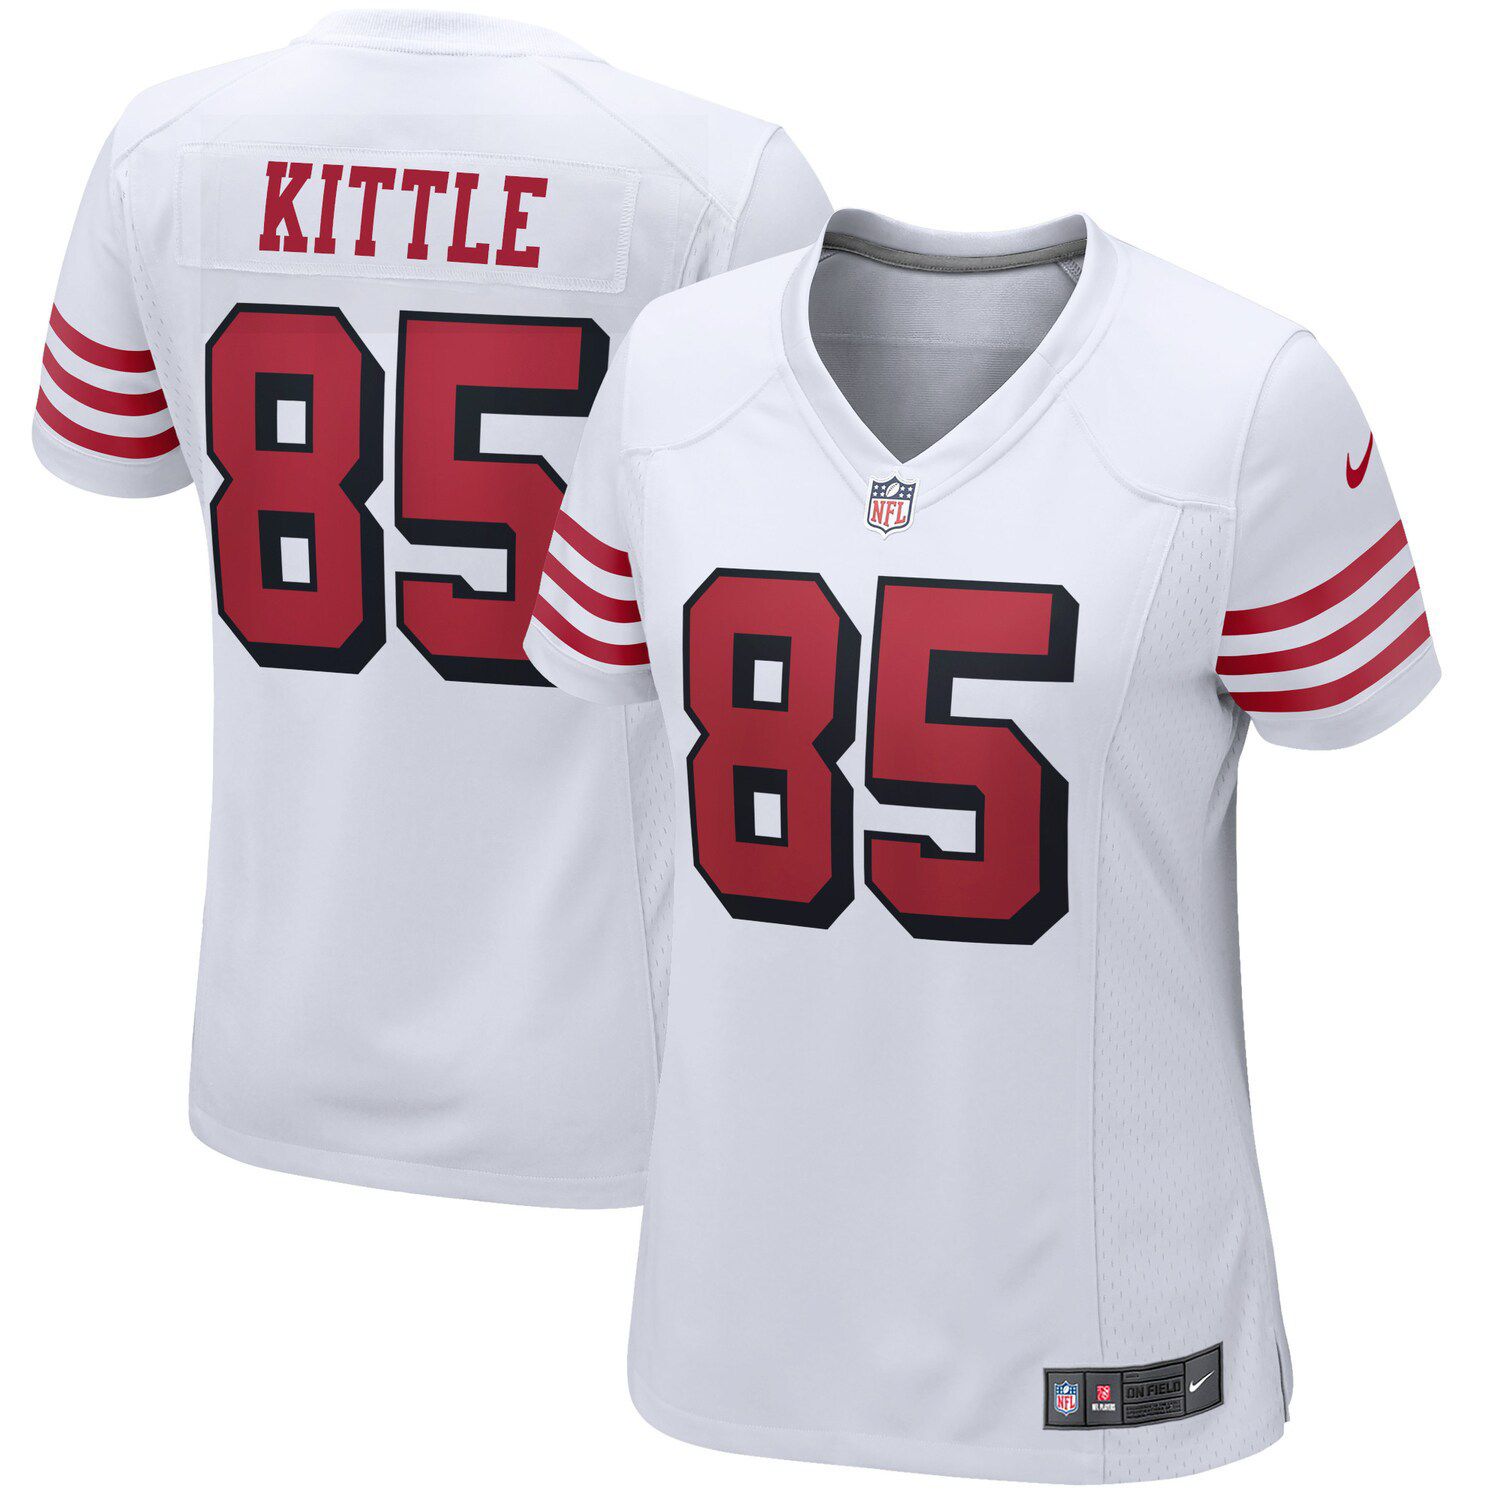 george kittle game jersey